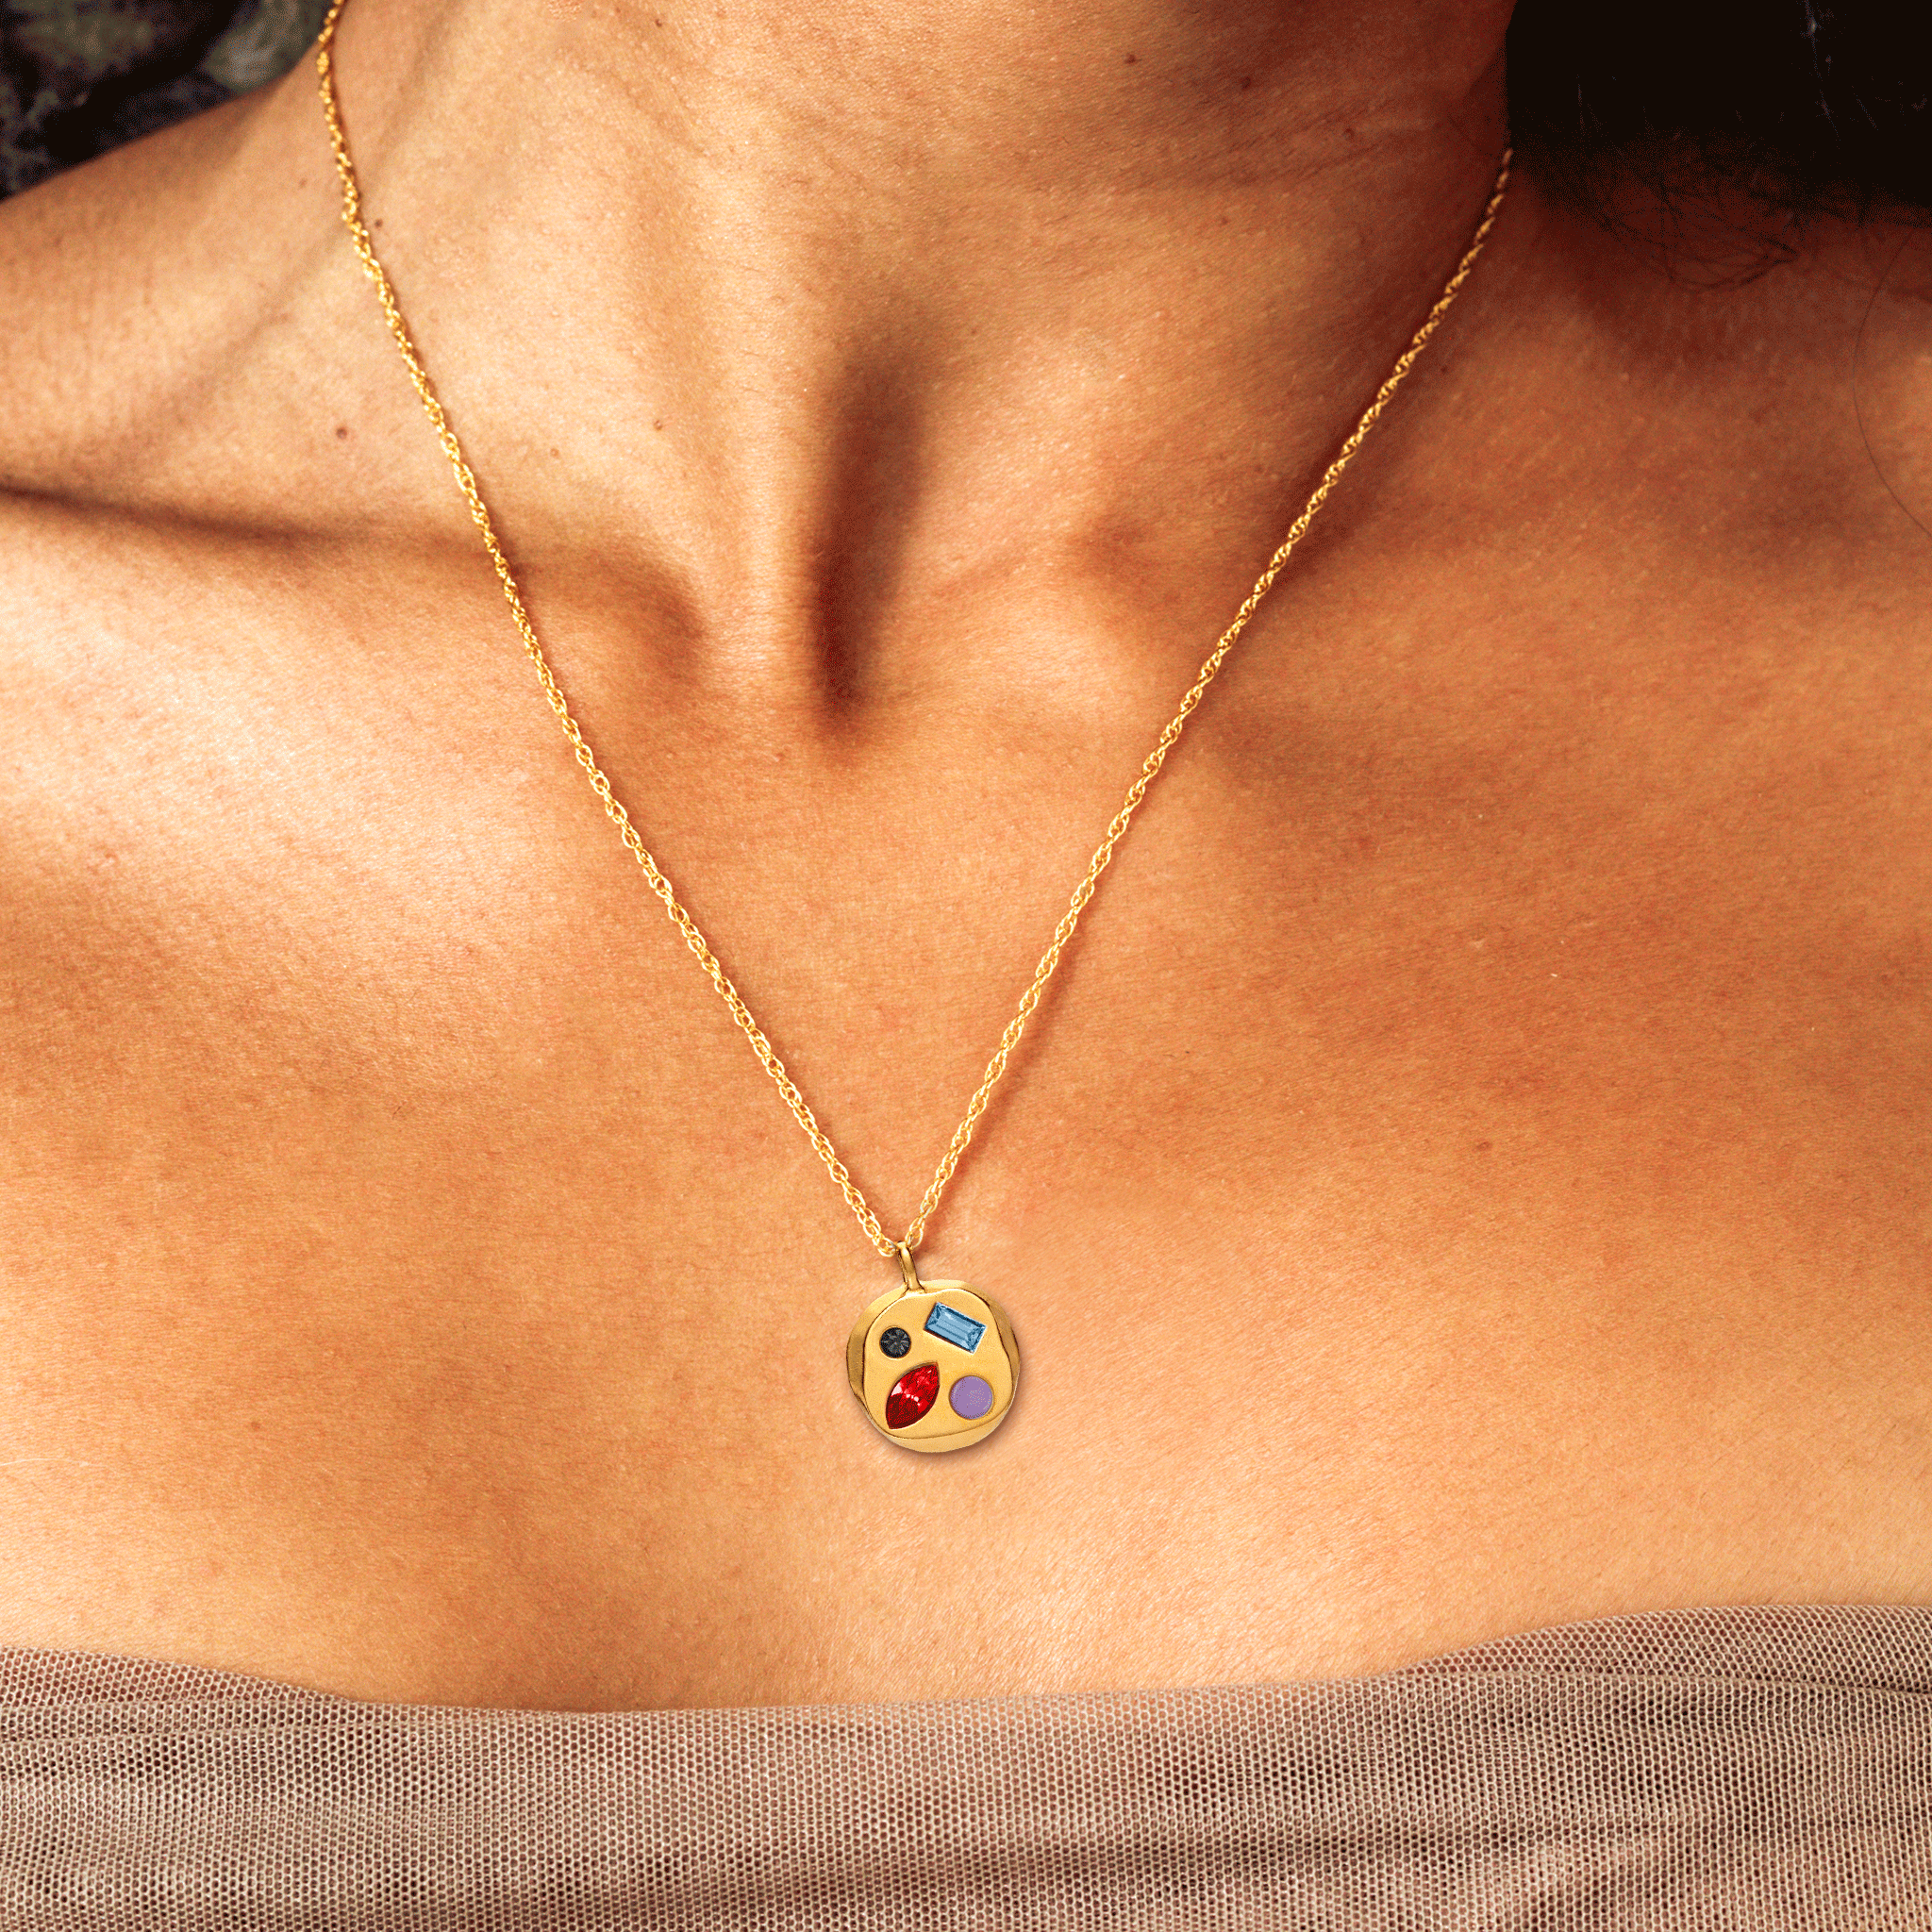 Person wearing The January Thirtieth Pendant